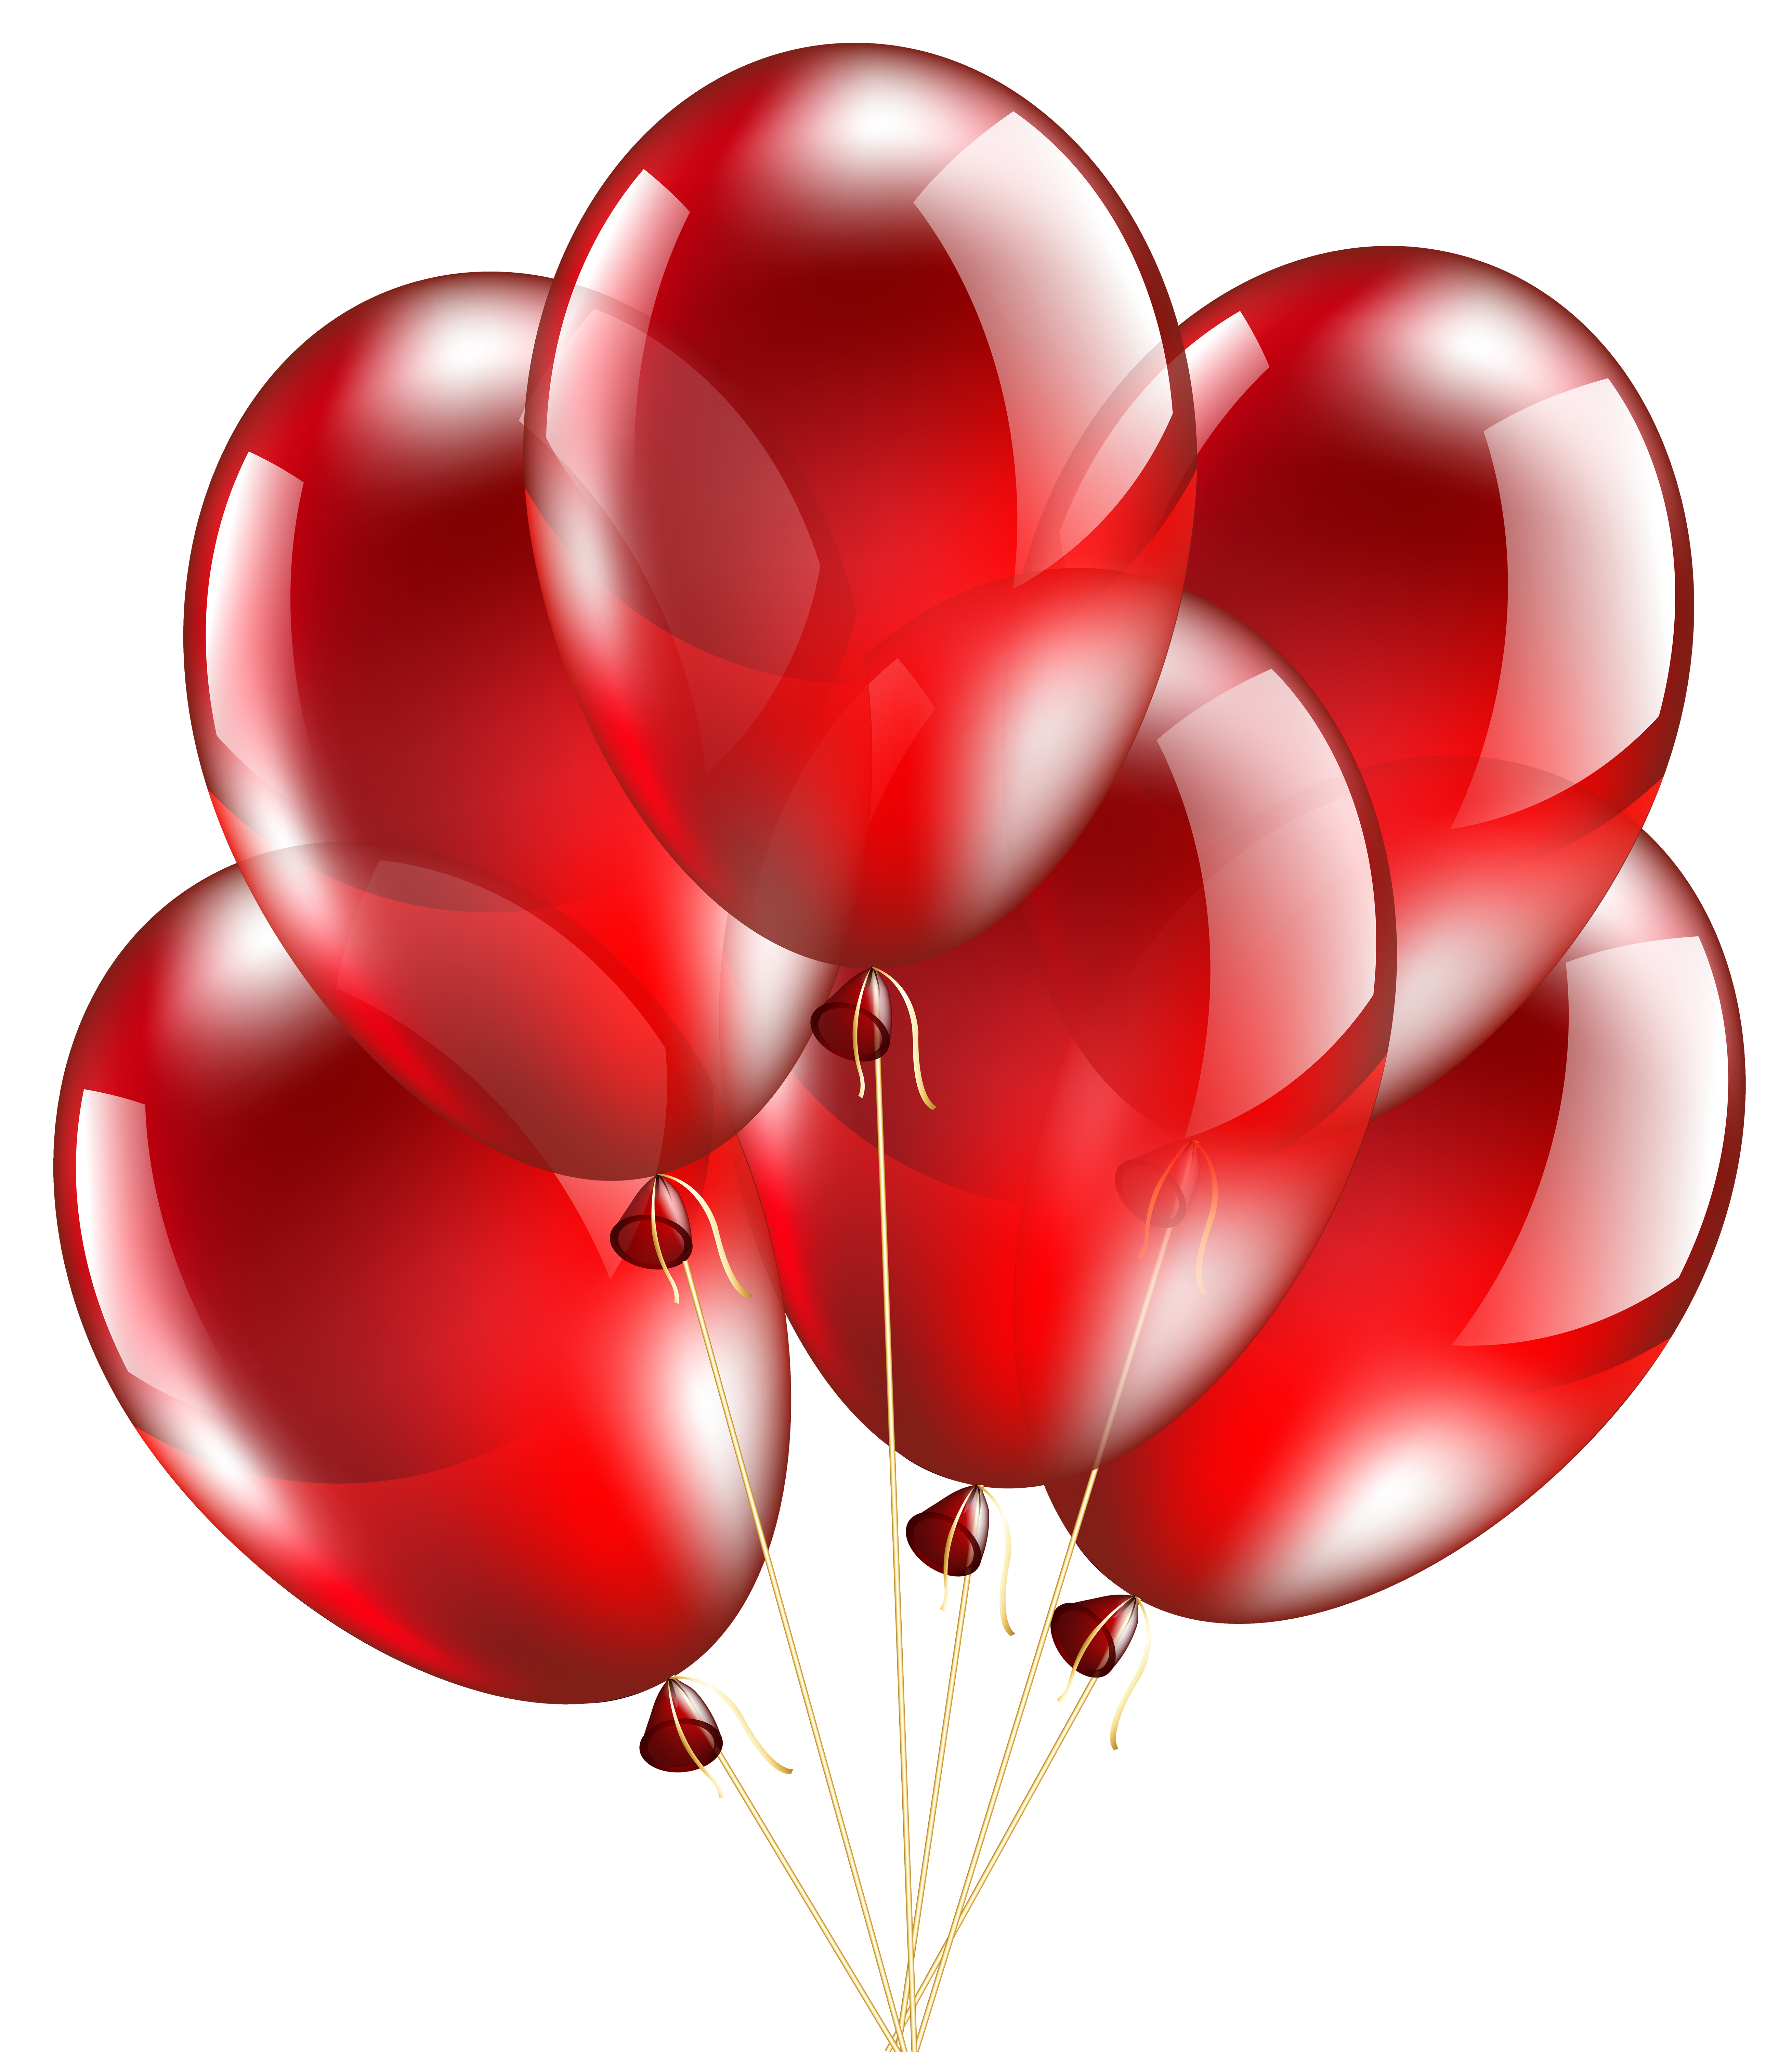 balloons clipart transparent background red balloon